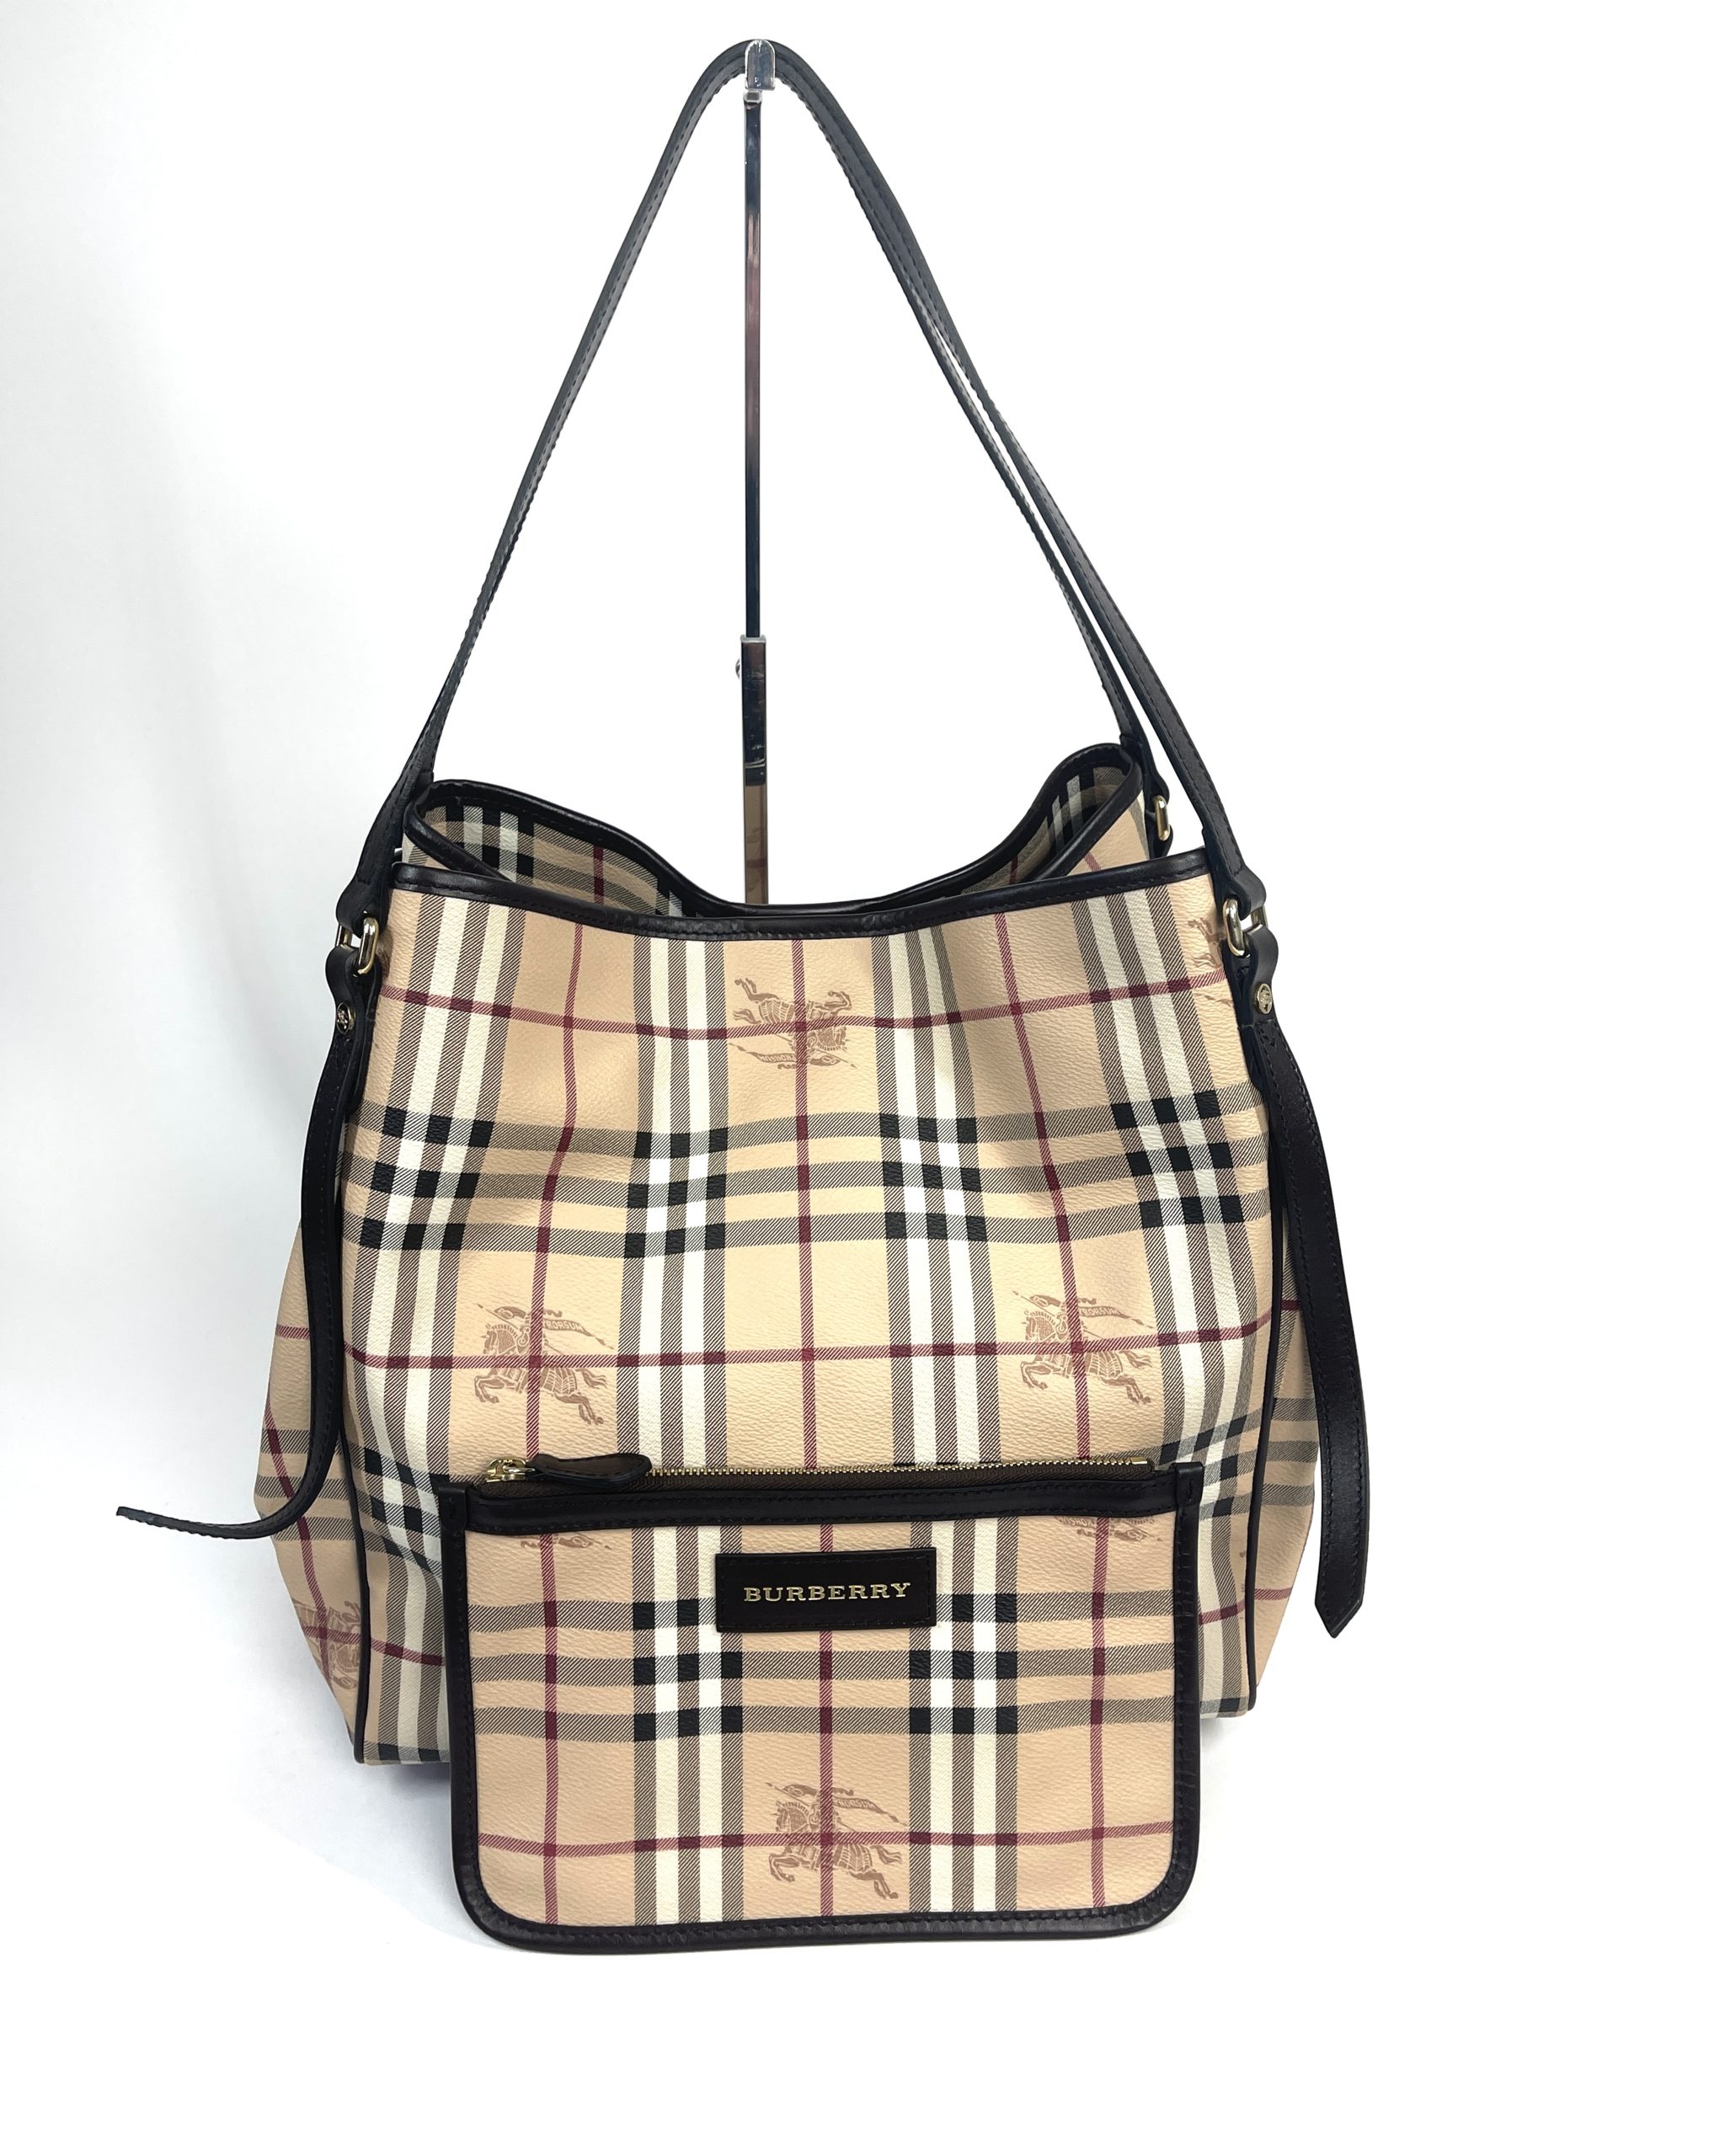 Authentic Burberry Canvas And Leather Check Tote bag Made In Italy